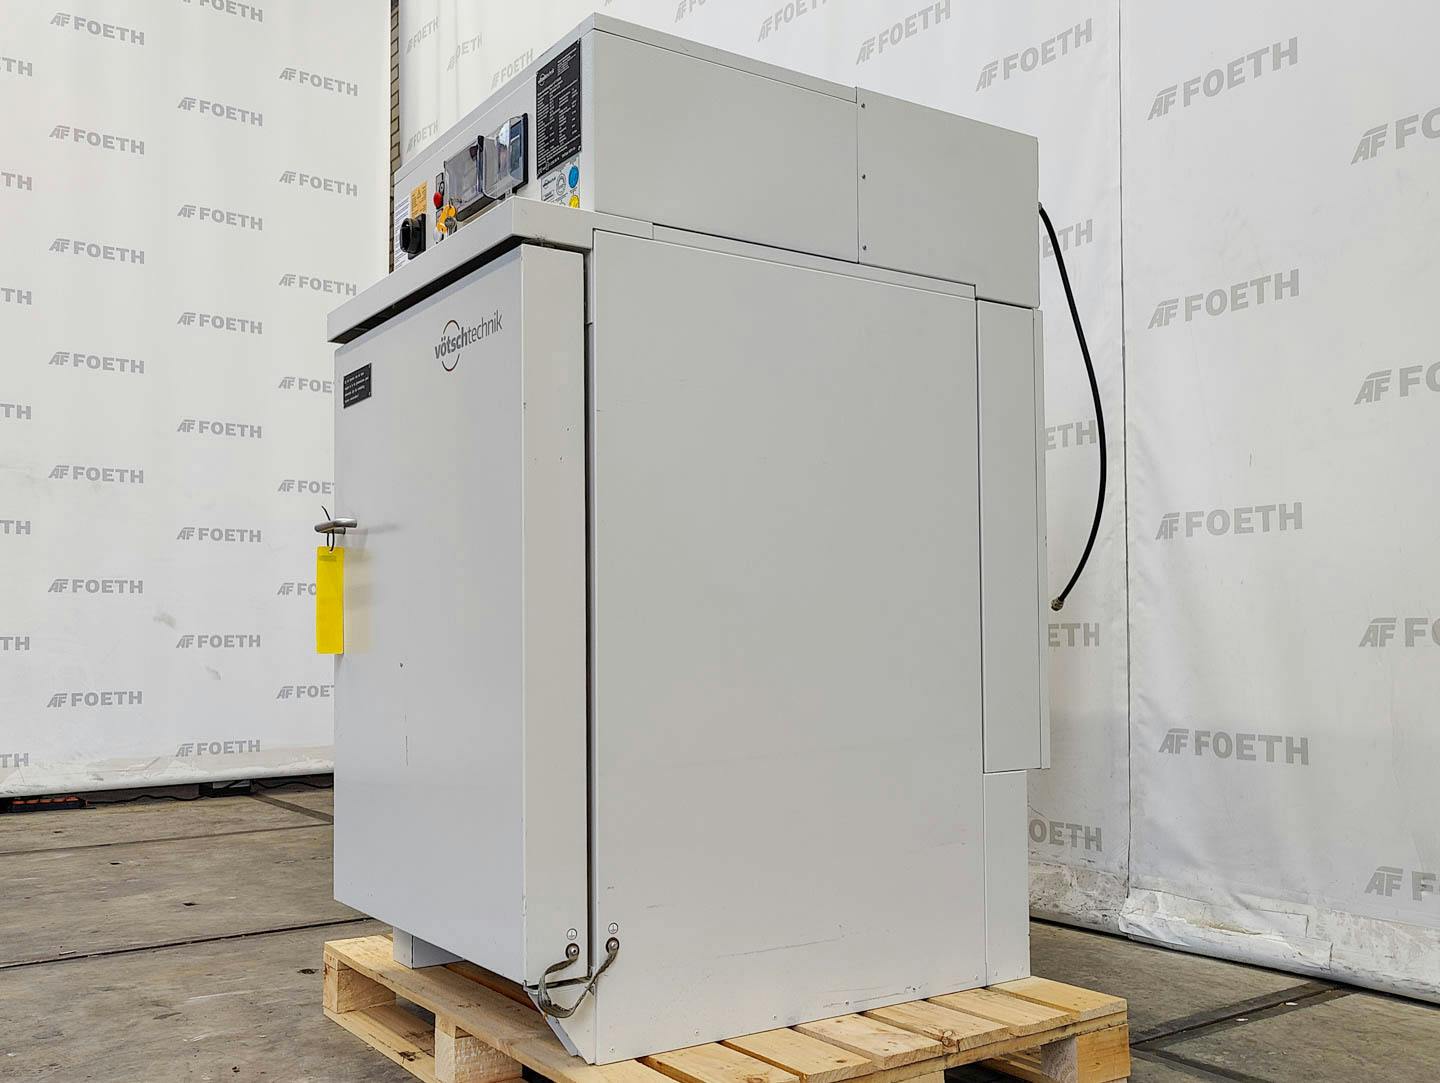 Vötsch VFT 60/90 - fresh-air drying cabinet - Drying oven - image 7